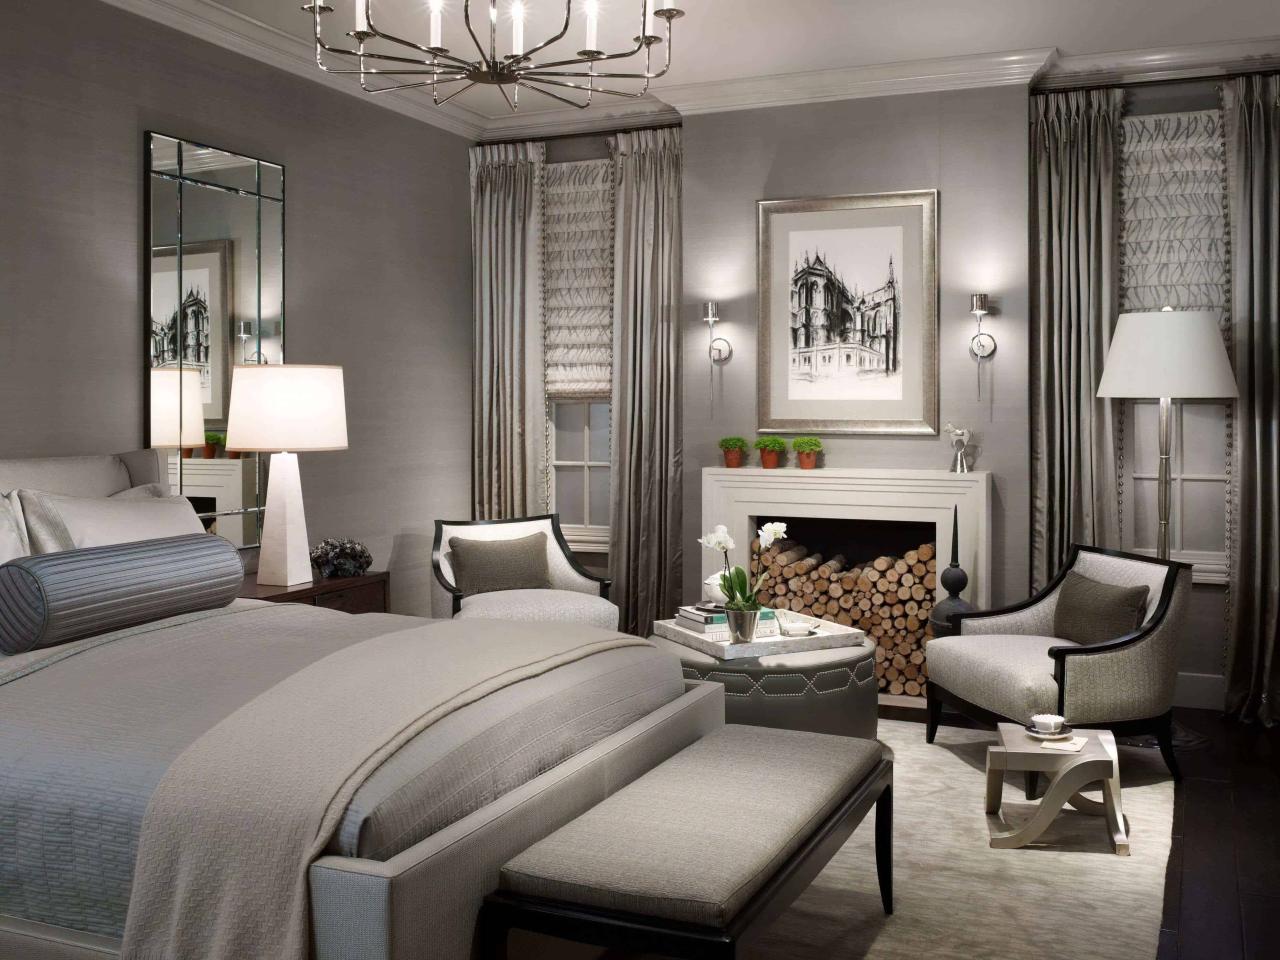 Masculine Bedroom Ideas for a Sophisticated Look